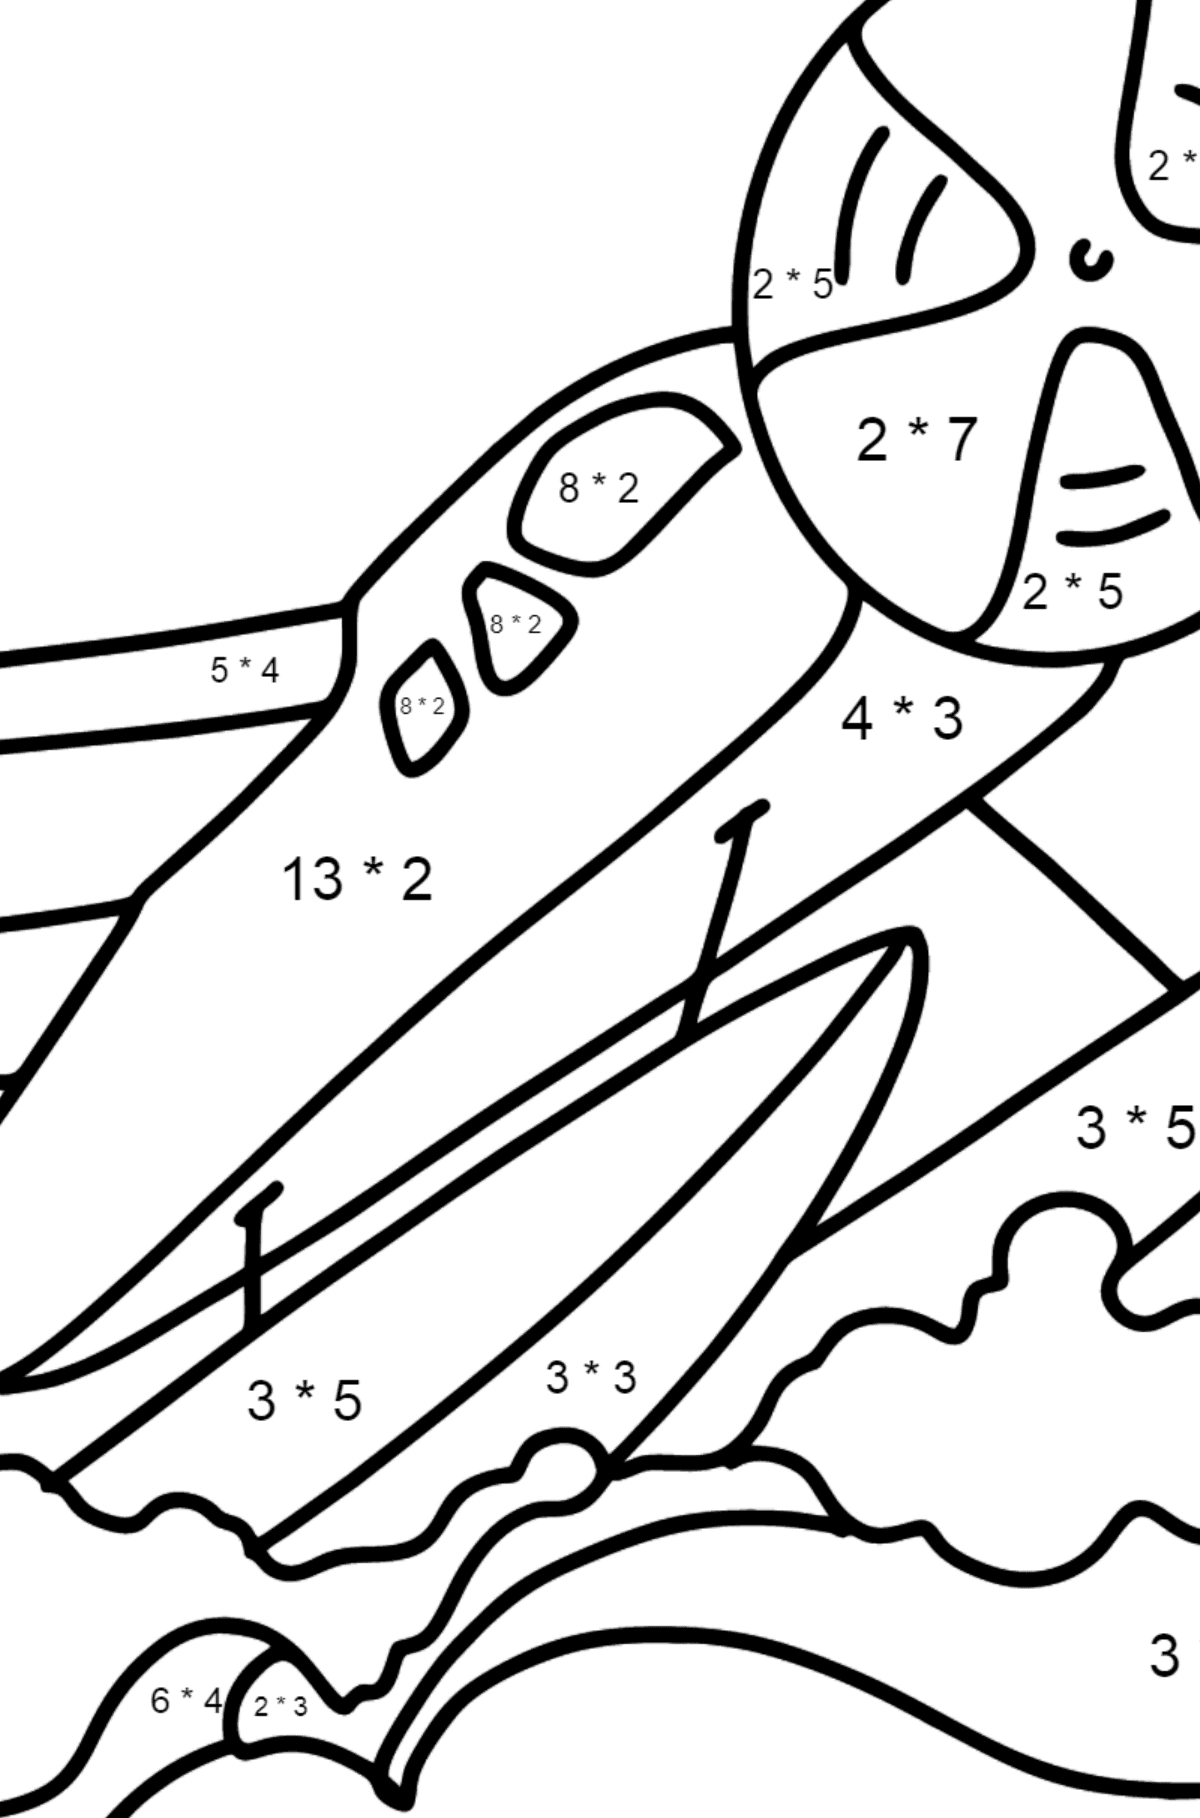 Amphibious Airplane coloring page - Math Coloring - Multiplication for Kids